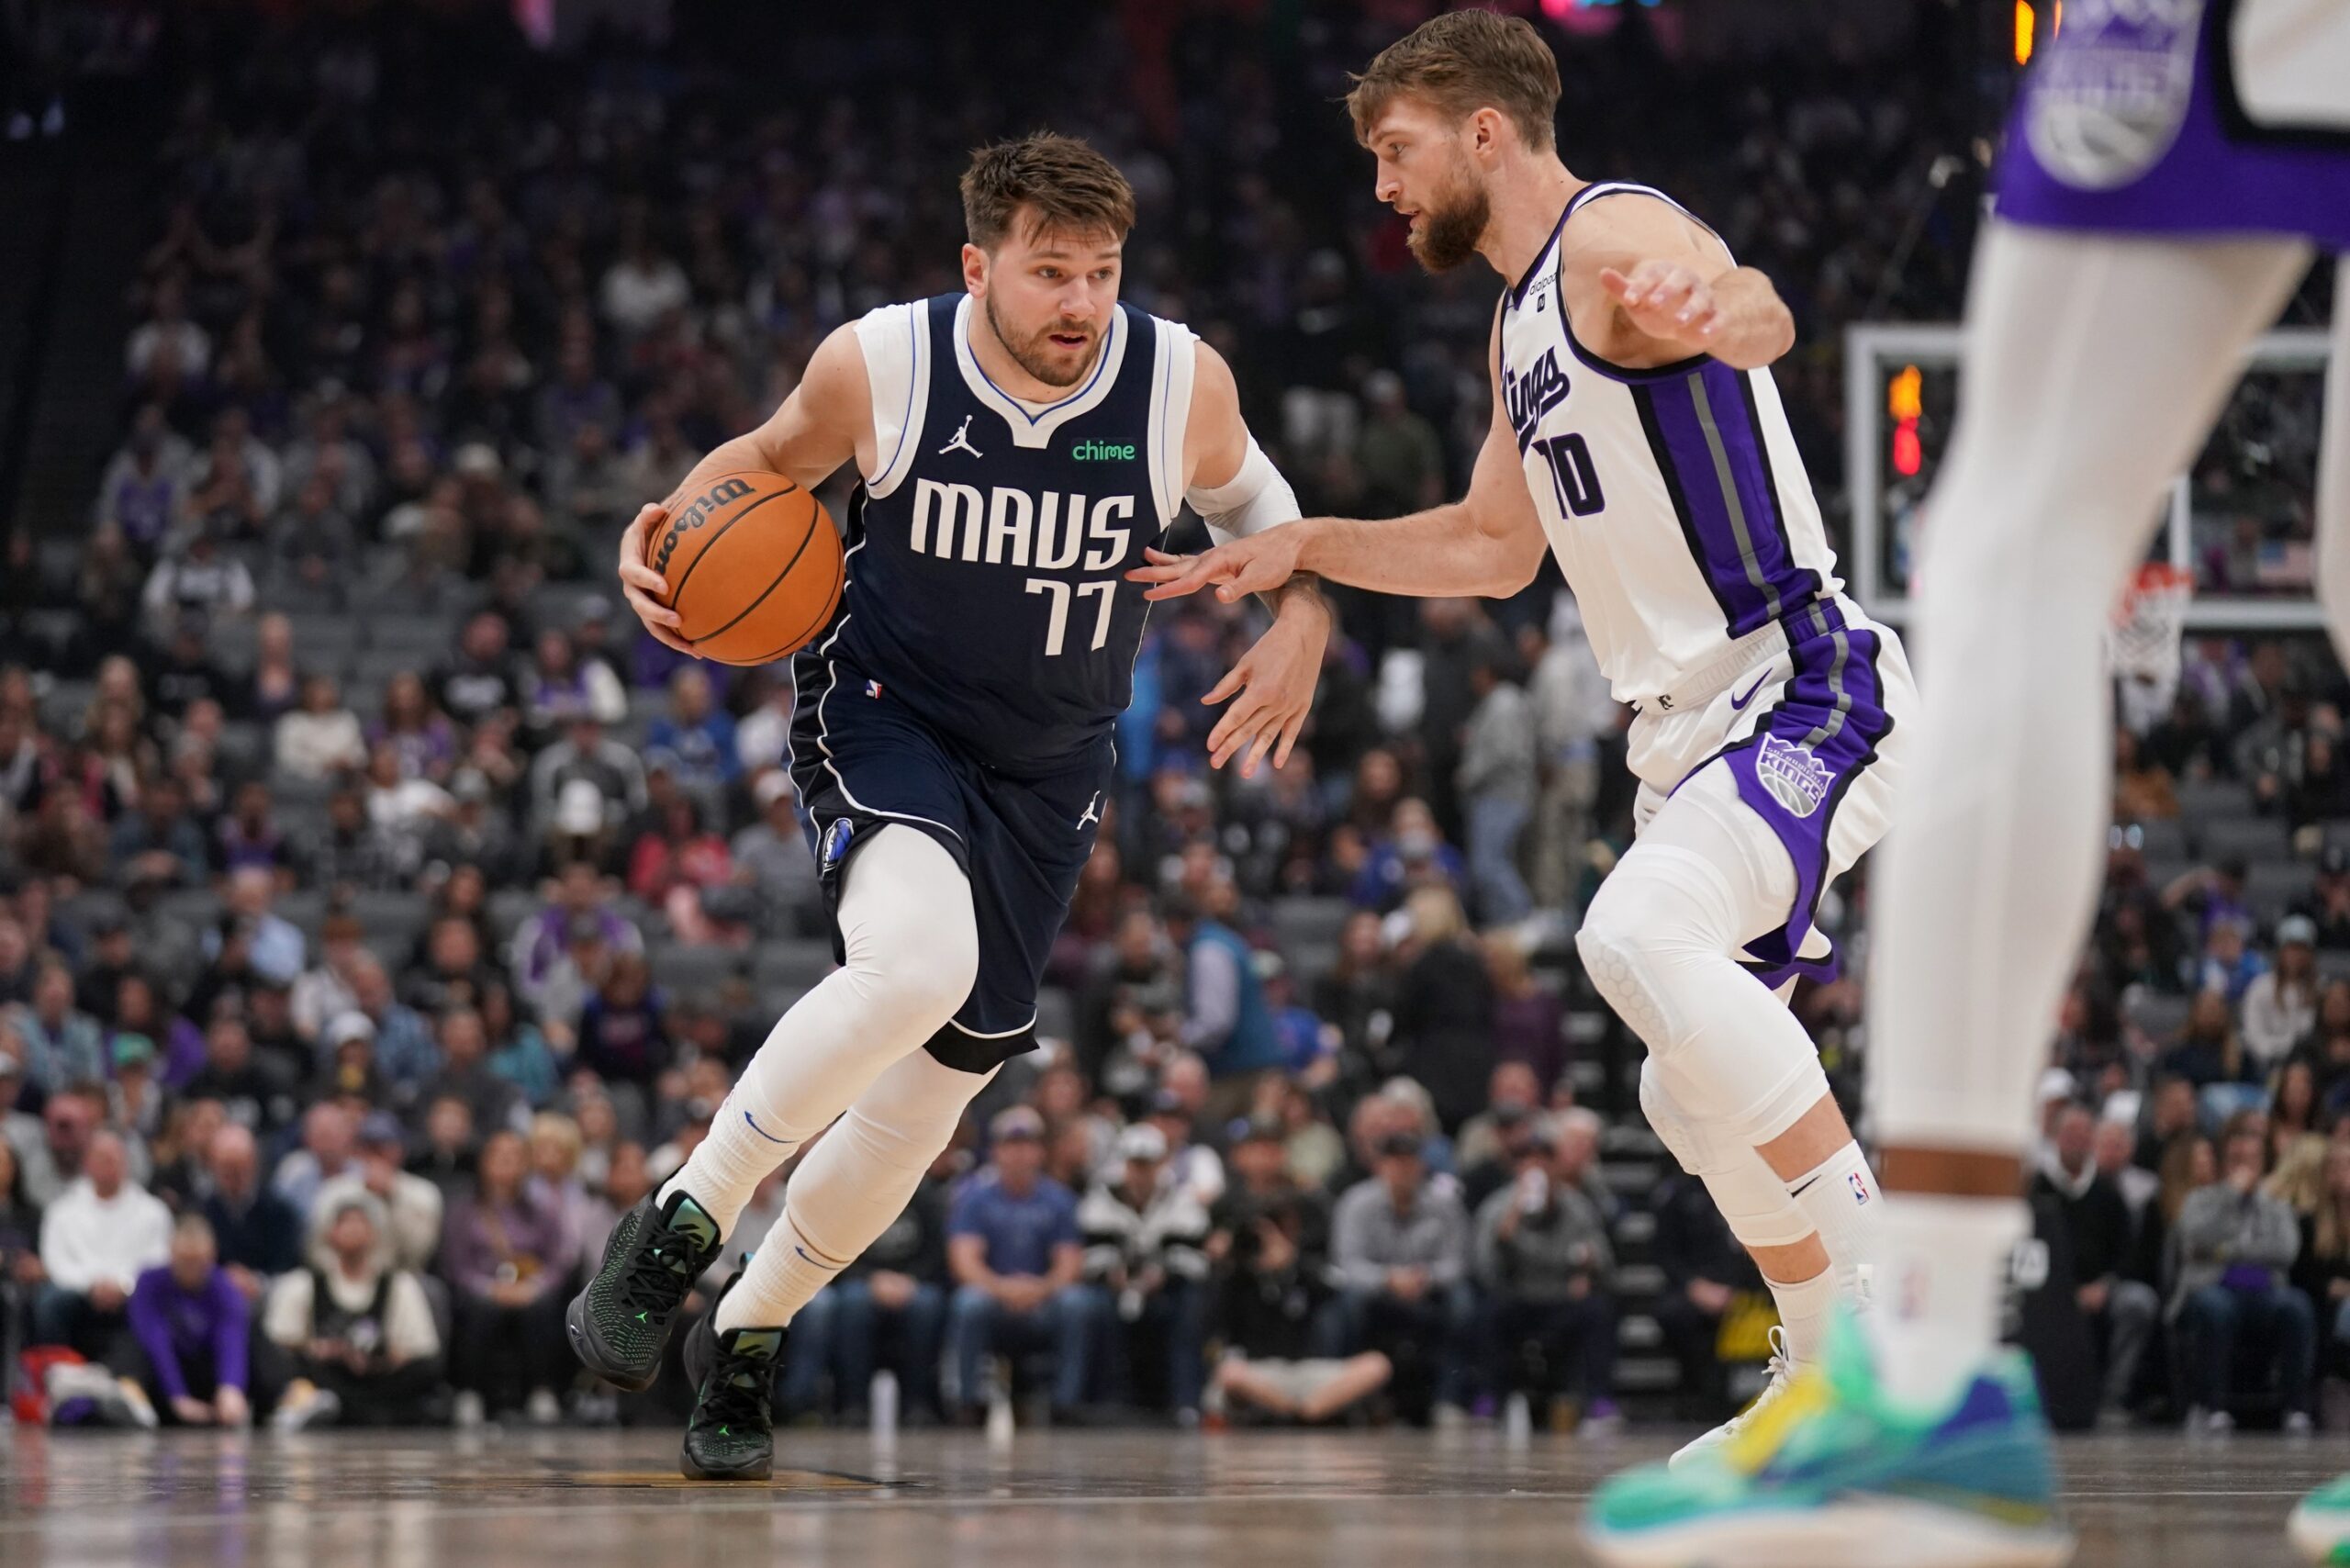 Luka Doncic and Domantas Sabonis finished the season as league leaders in different stats.